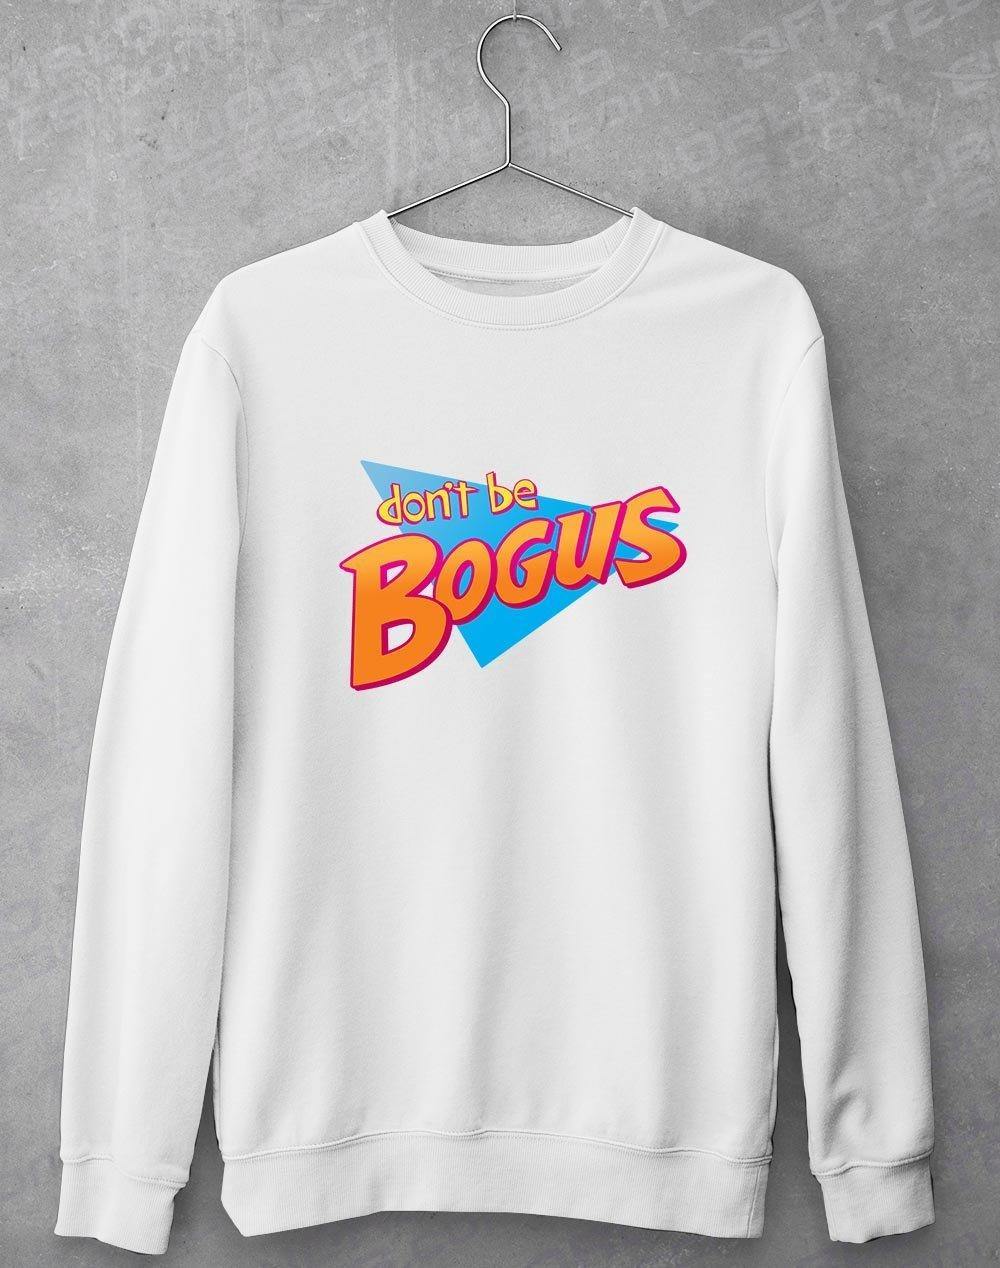 Dont be Bogus Sweatshirt S / White  - Off World Tees